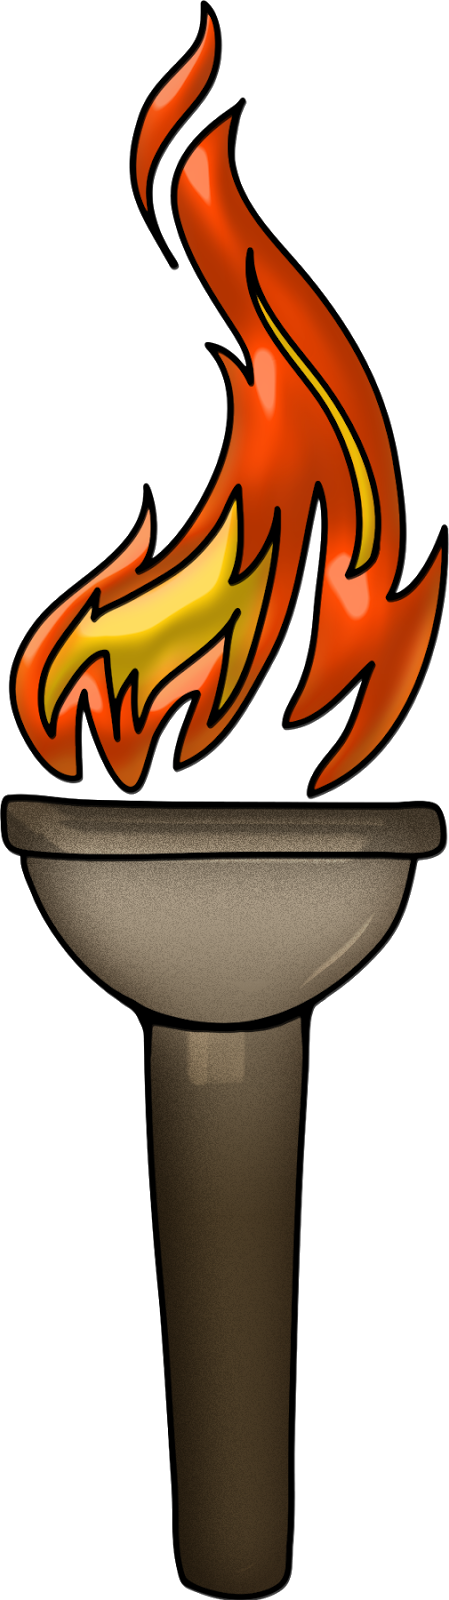 Torch clipart